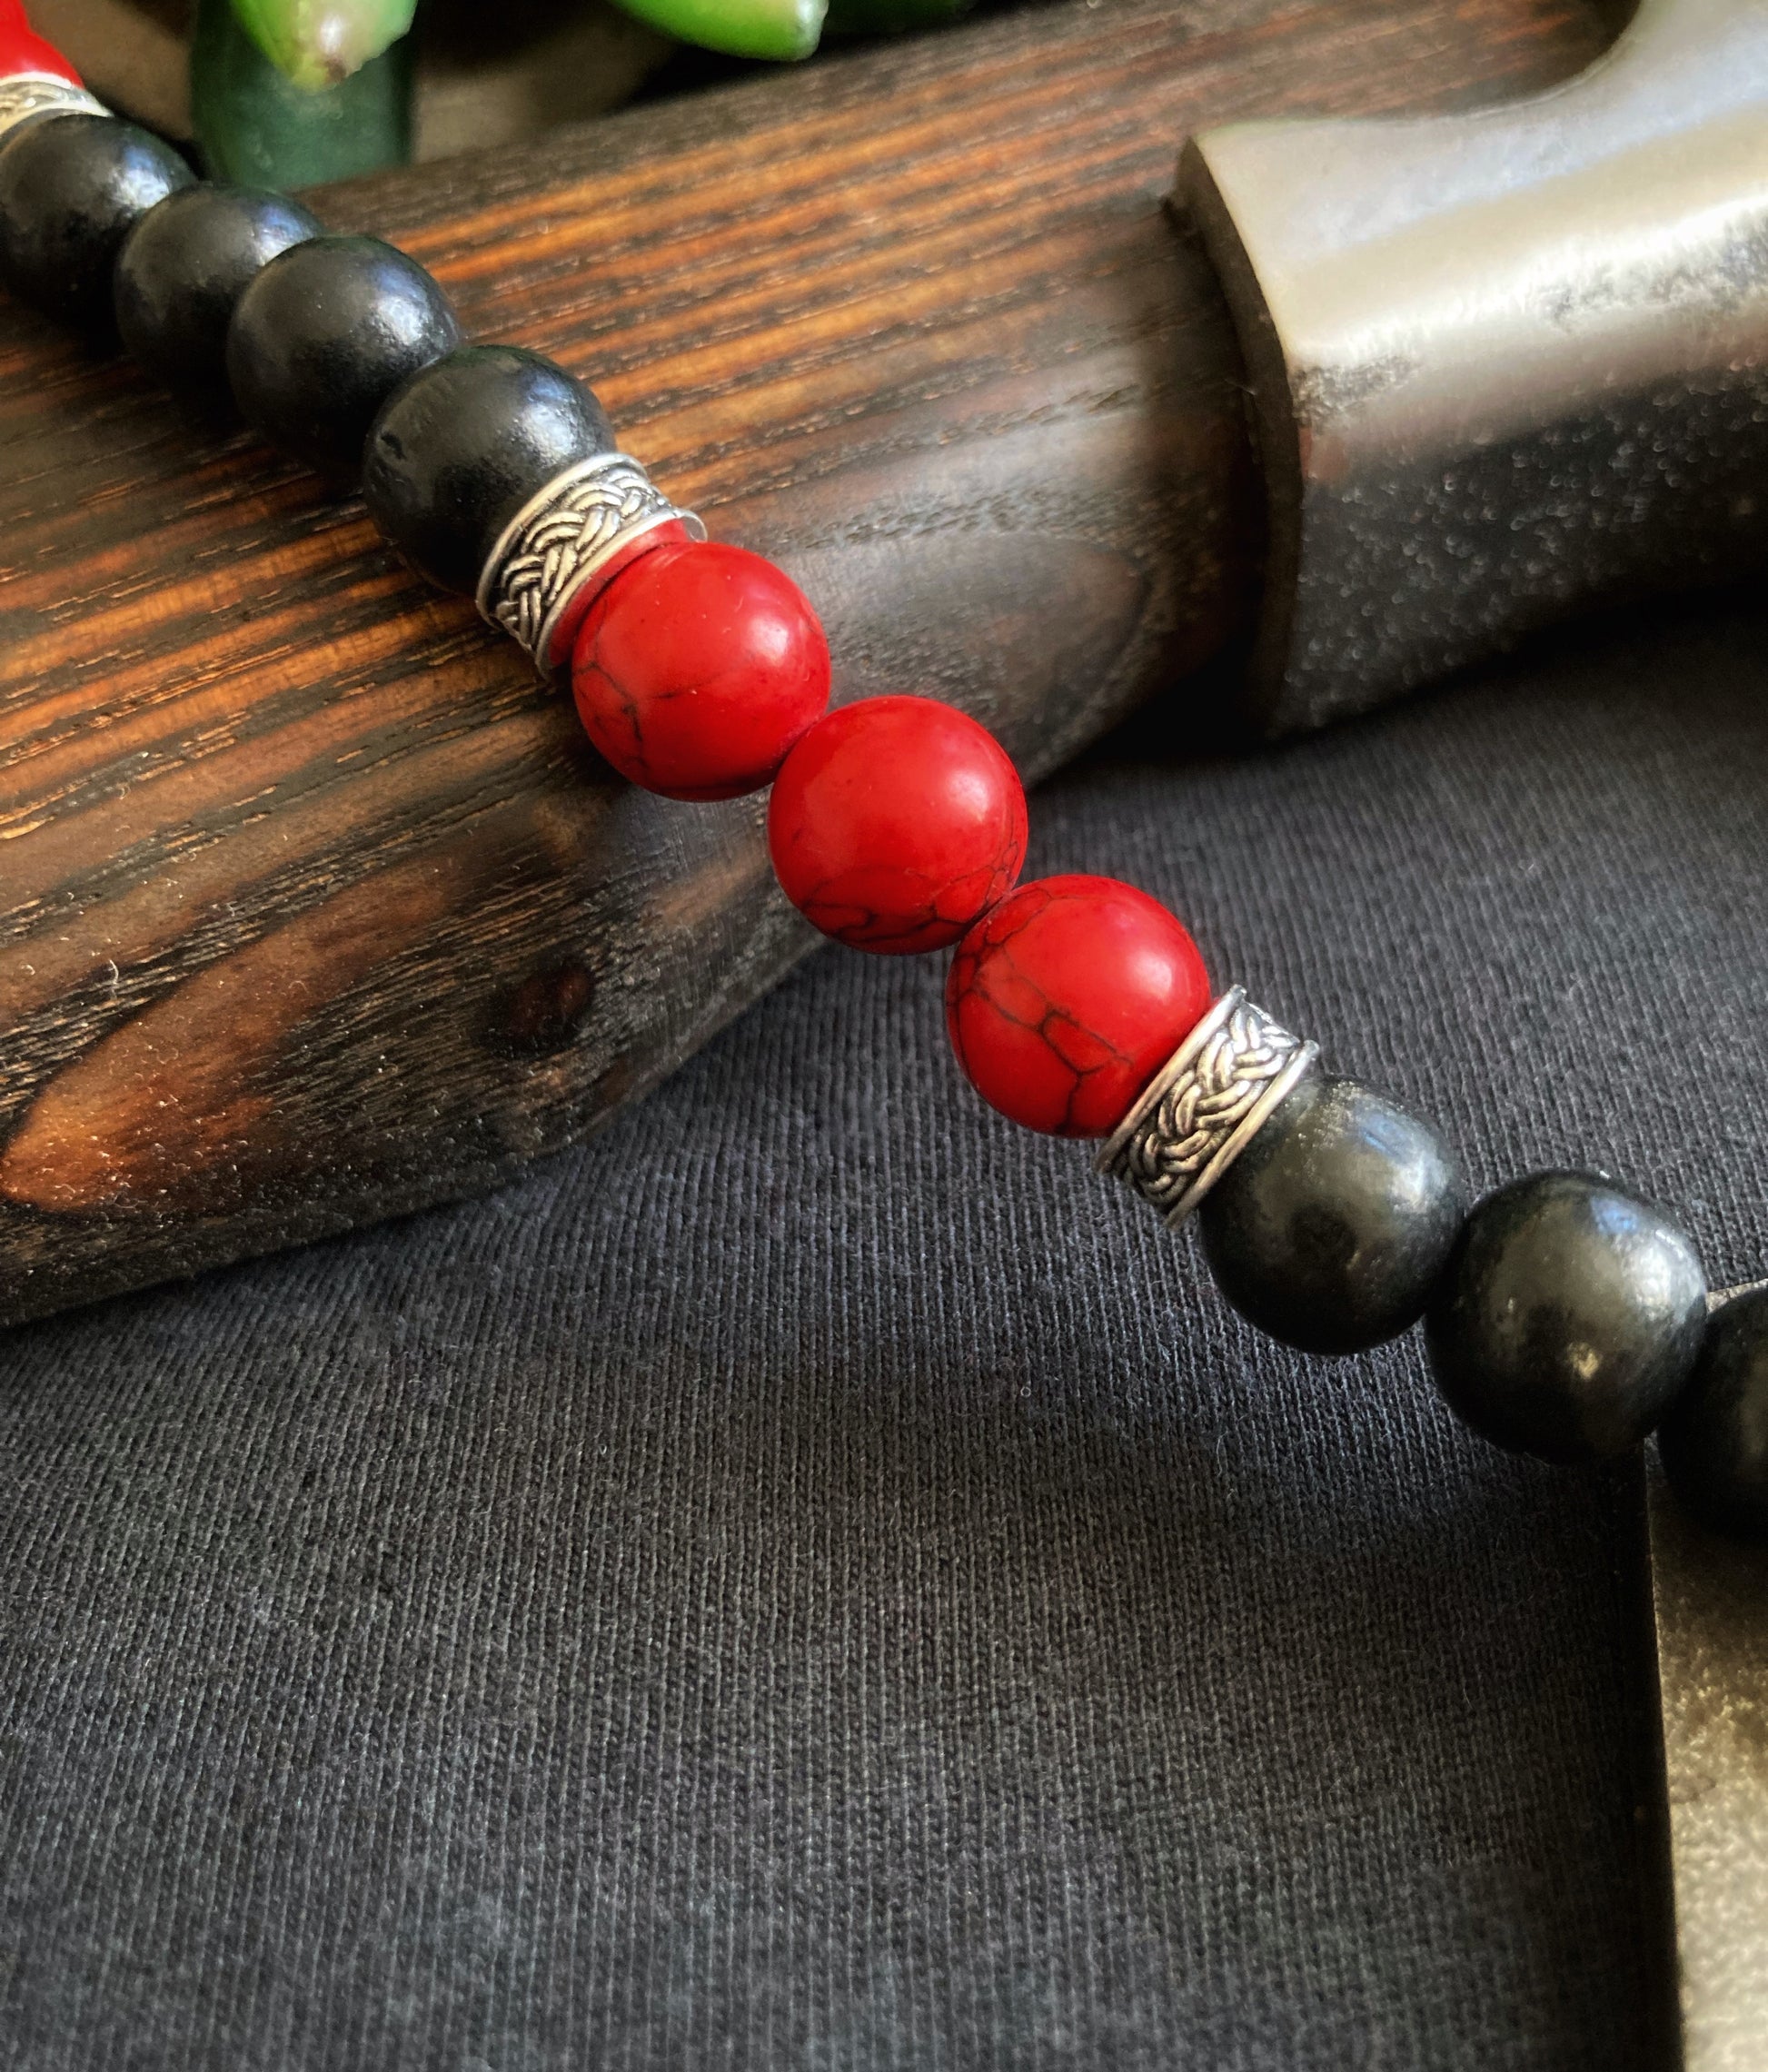 A section of a necklace is on show draped over an axe handle. You can see the red coloured beads that have a darker streak going through them. There are 3 of these beads and either side sits narrow metal bands to seperate the next part of which is black wooden style beads.